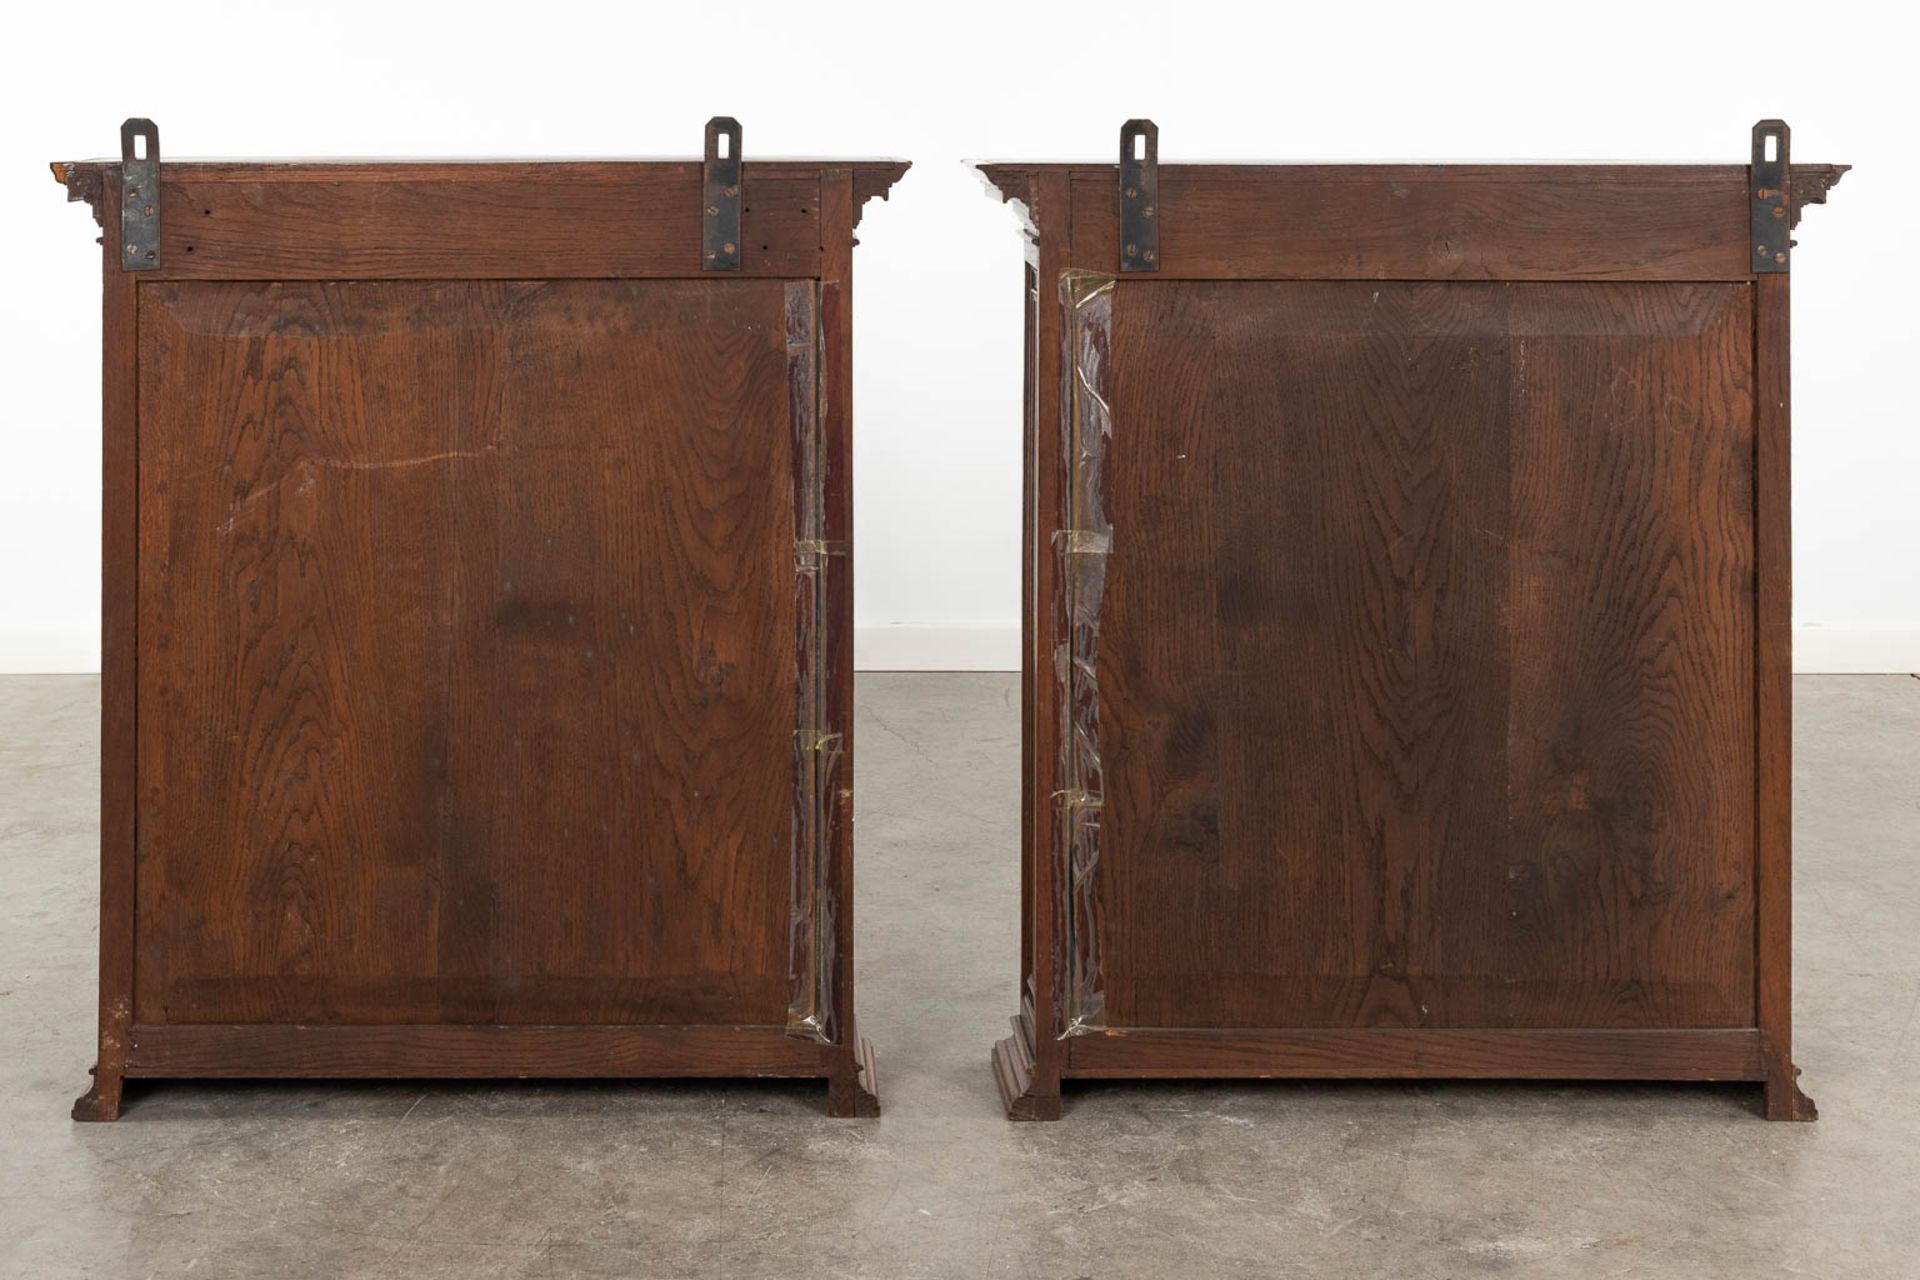 A pair of hanging cabinets, wood and glass. Circa 1900. (L: 17 x W: 75 x H: 83 cm) - Image 5 of 9